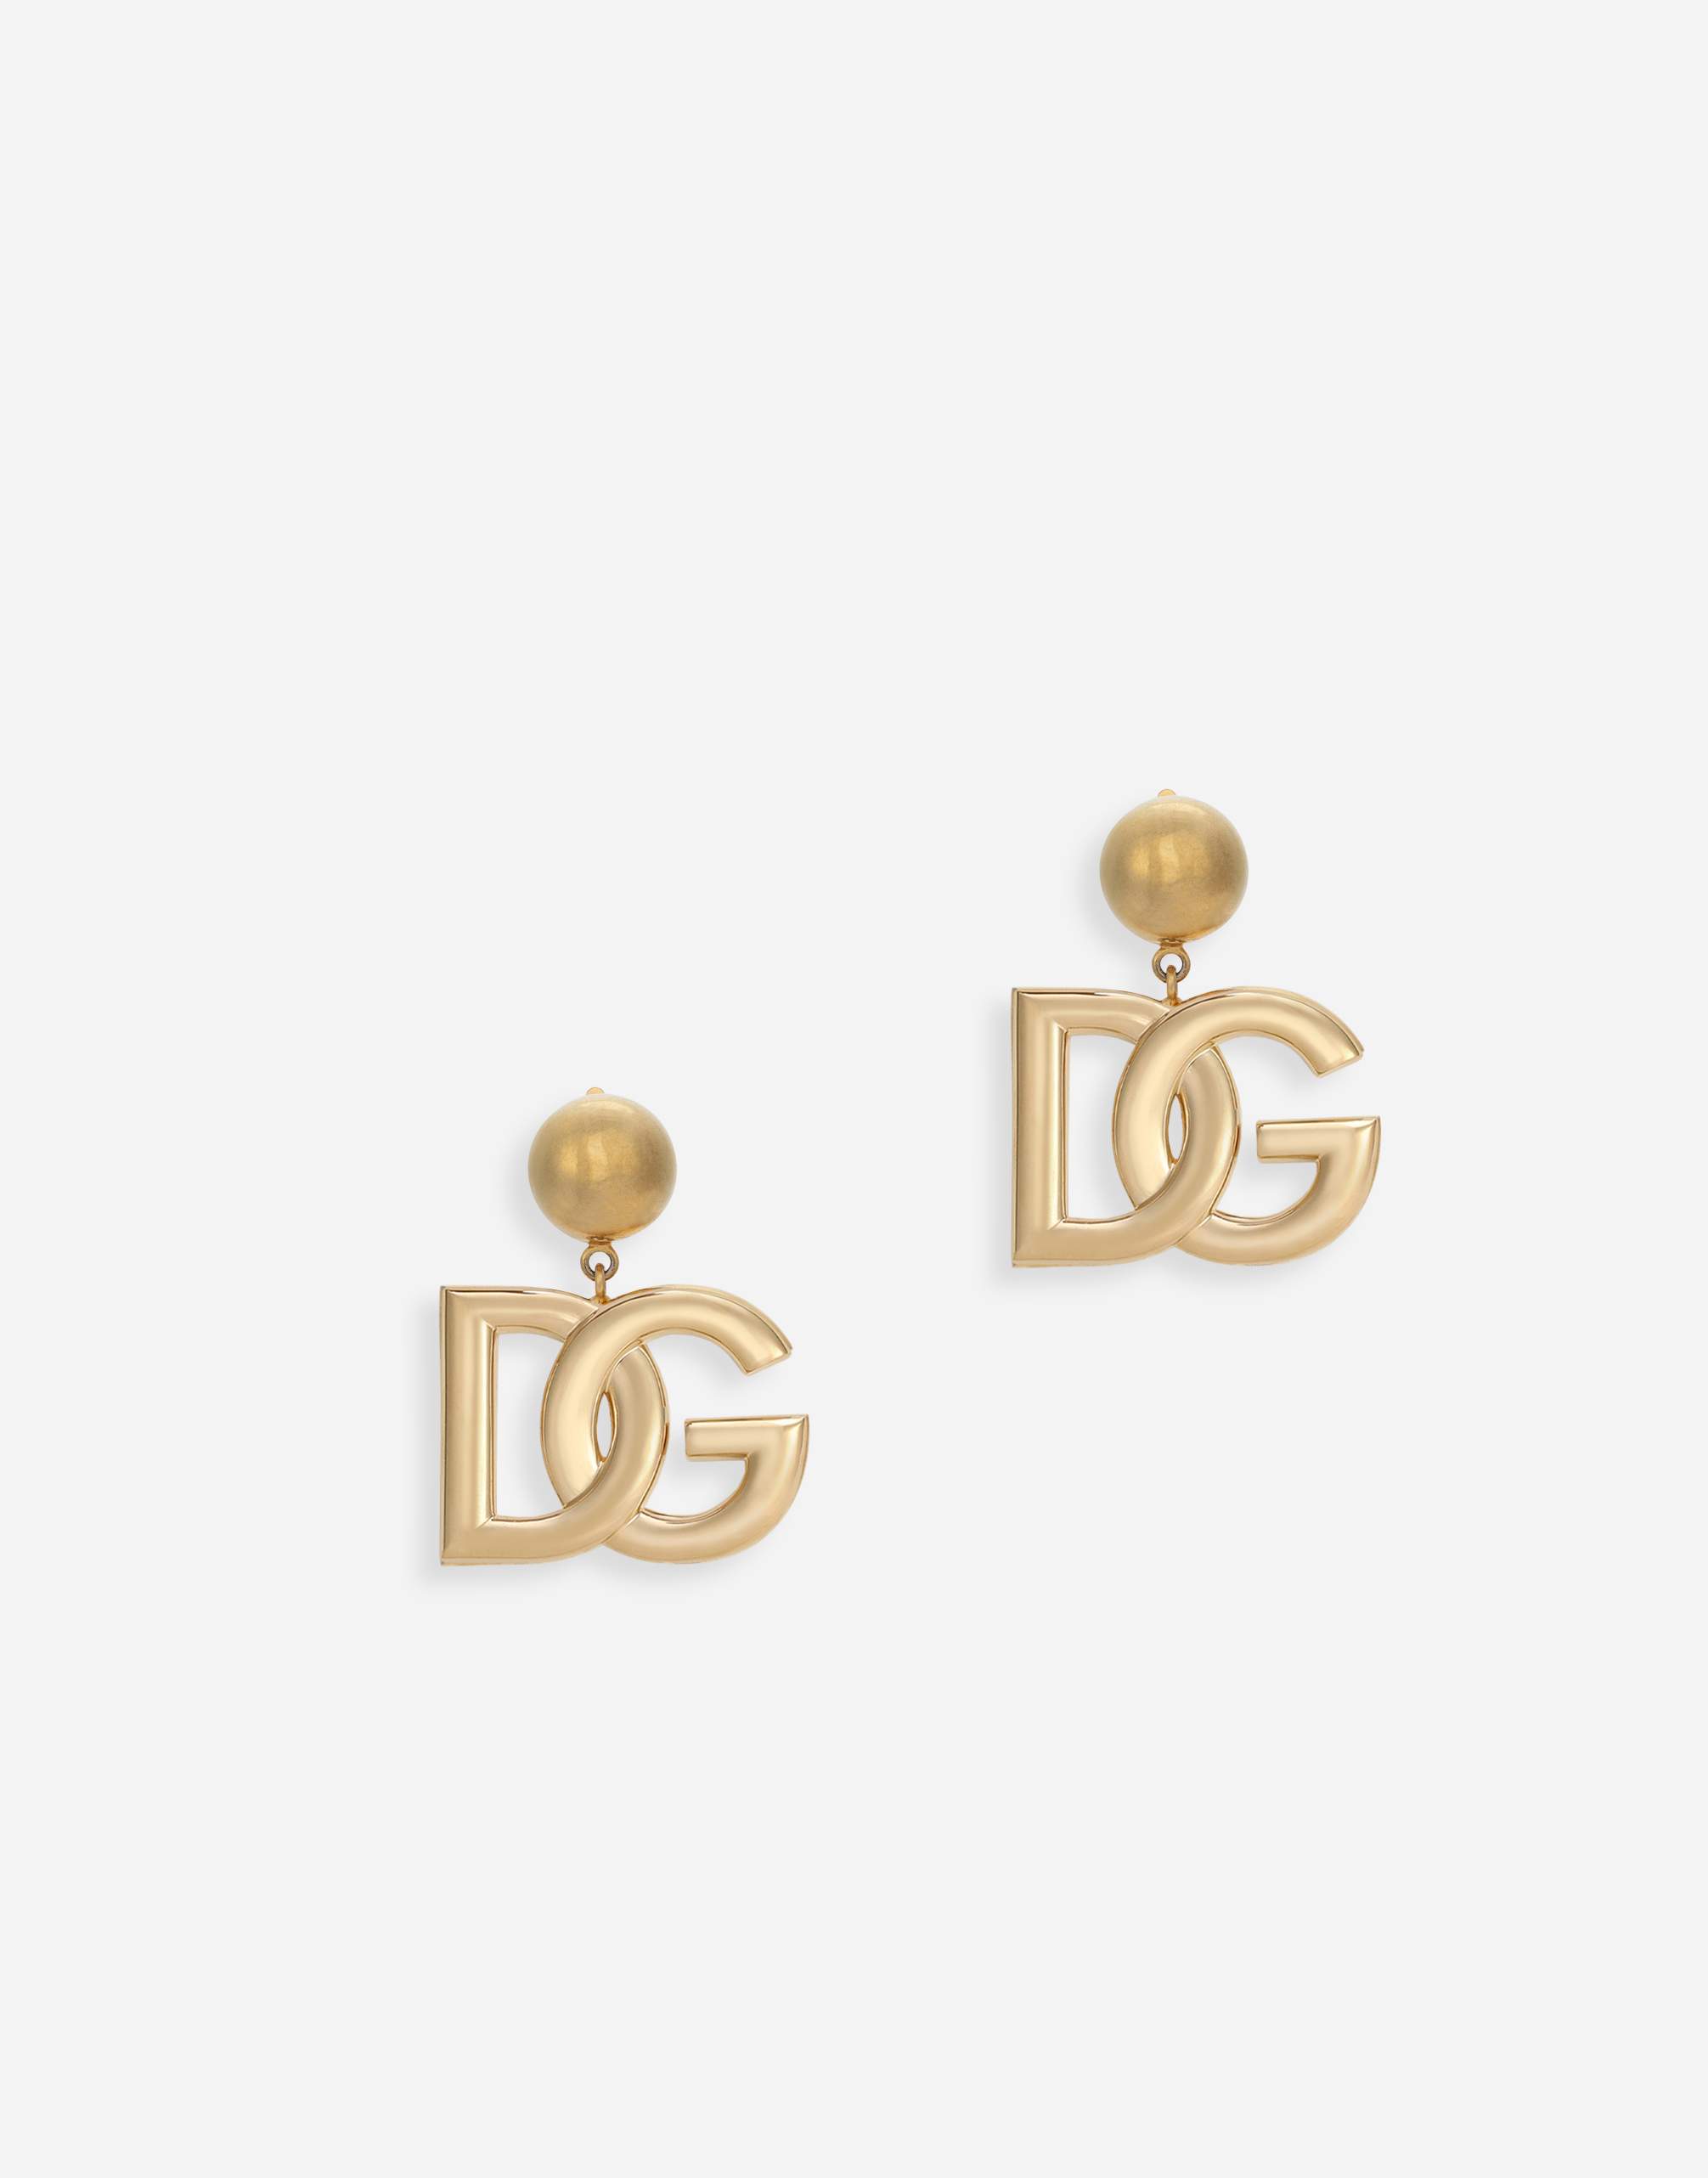 Clip-on earrings with DG logo in Gold